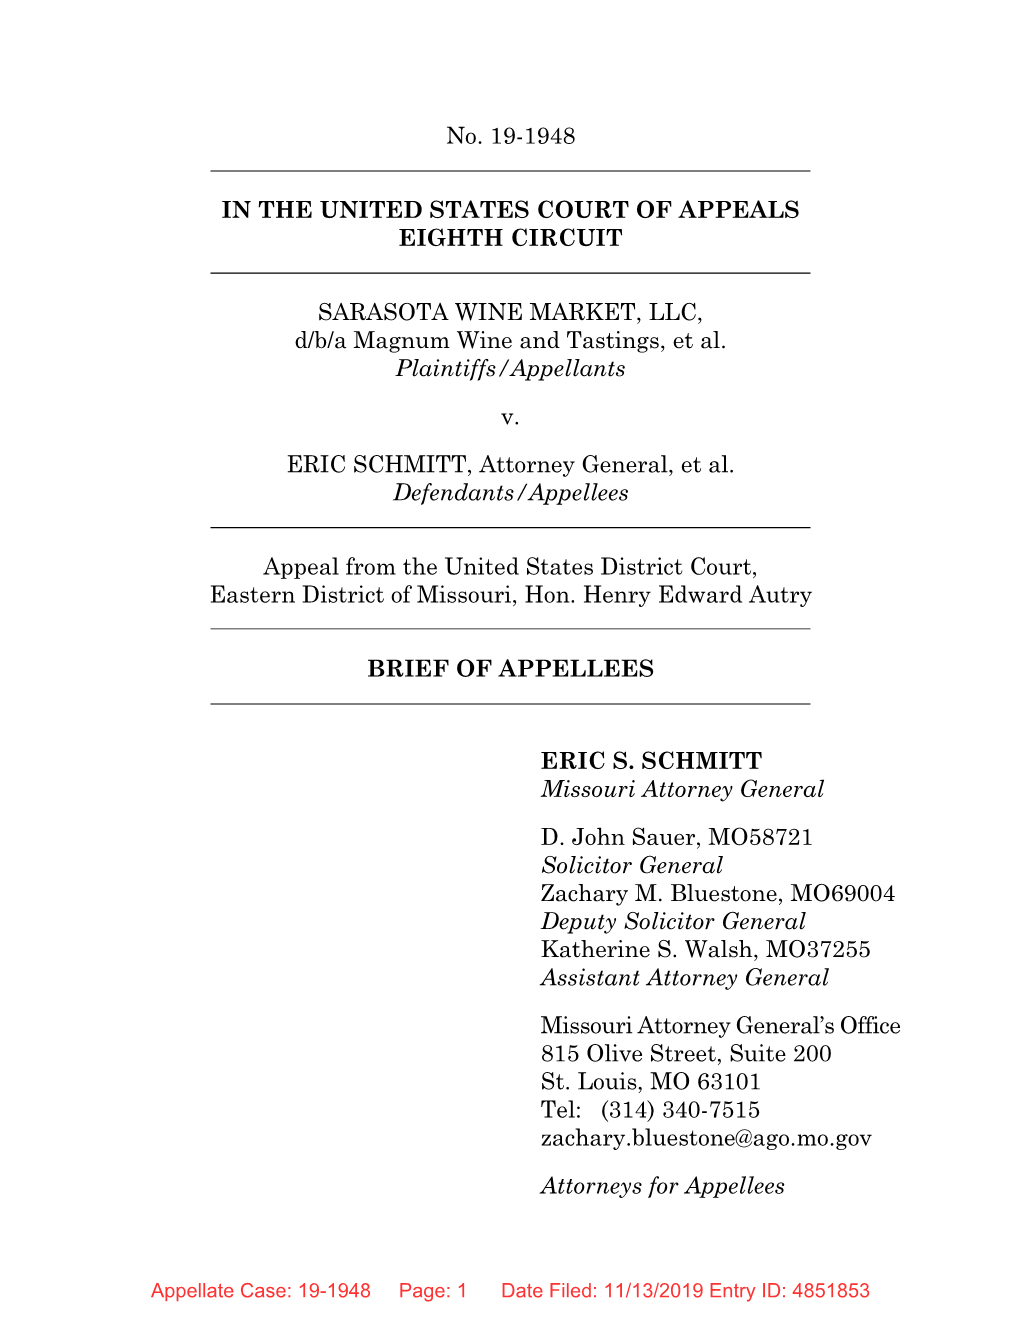 No. 19-1948 in the UNITED STATES COURT of APPEALS EIGHTH